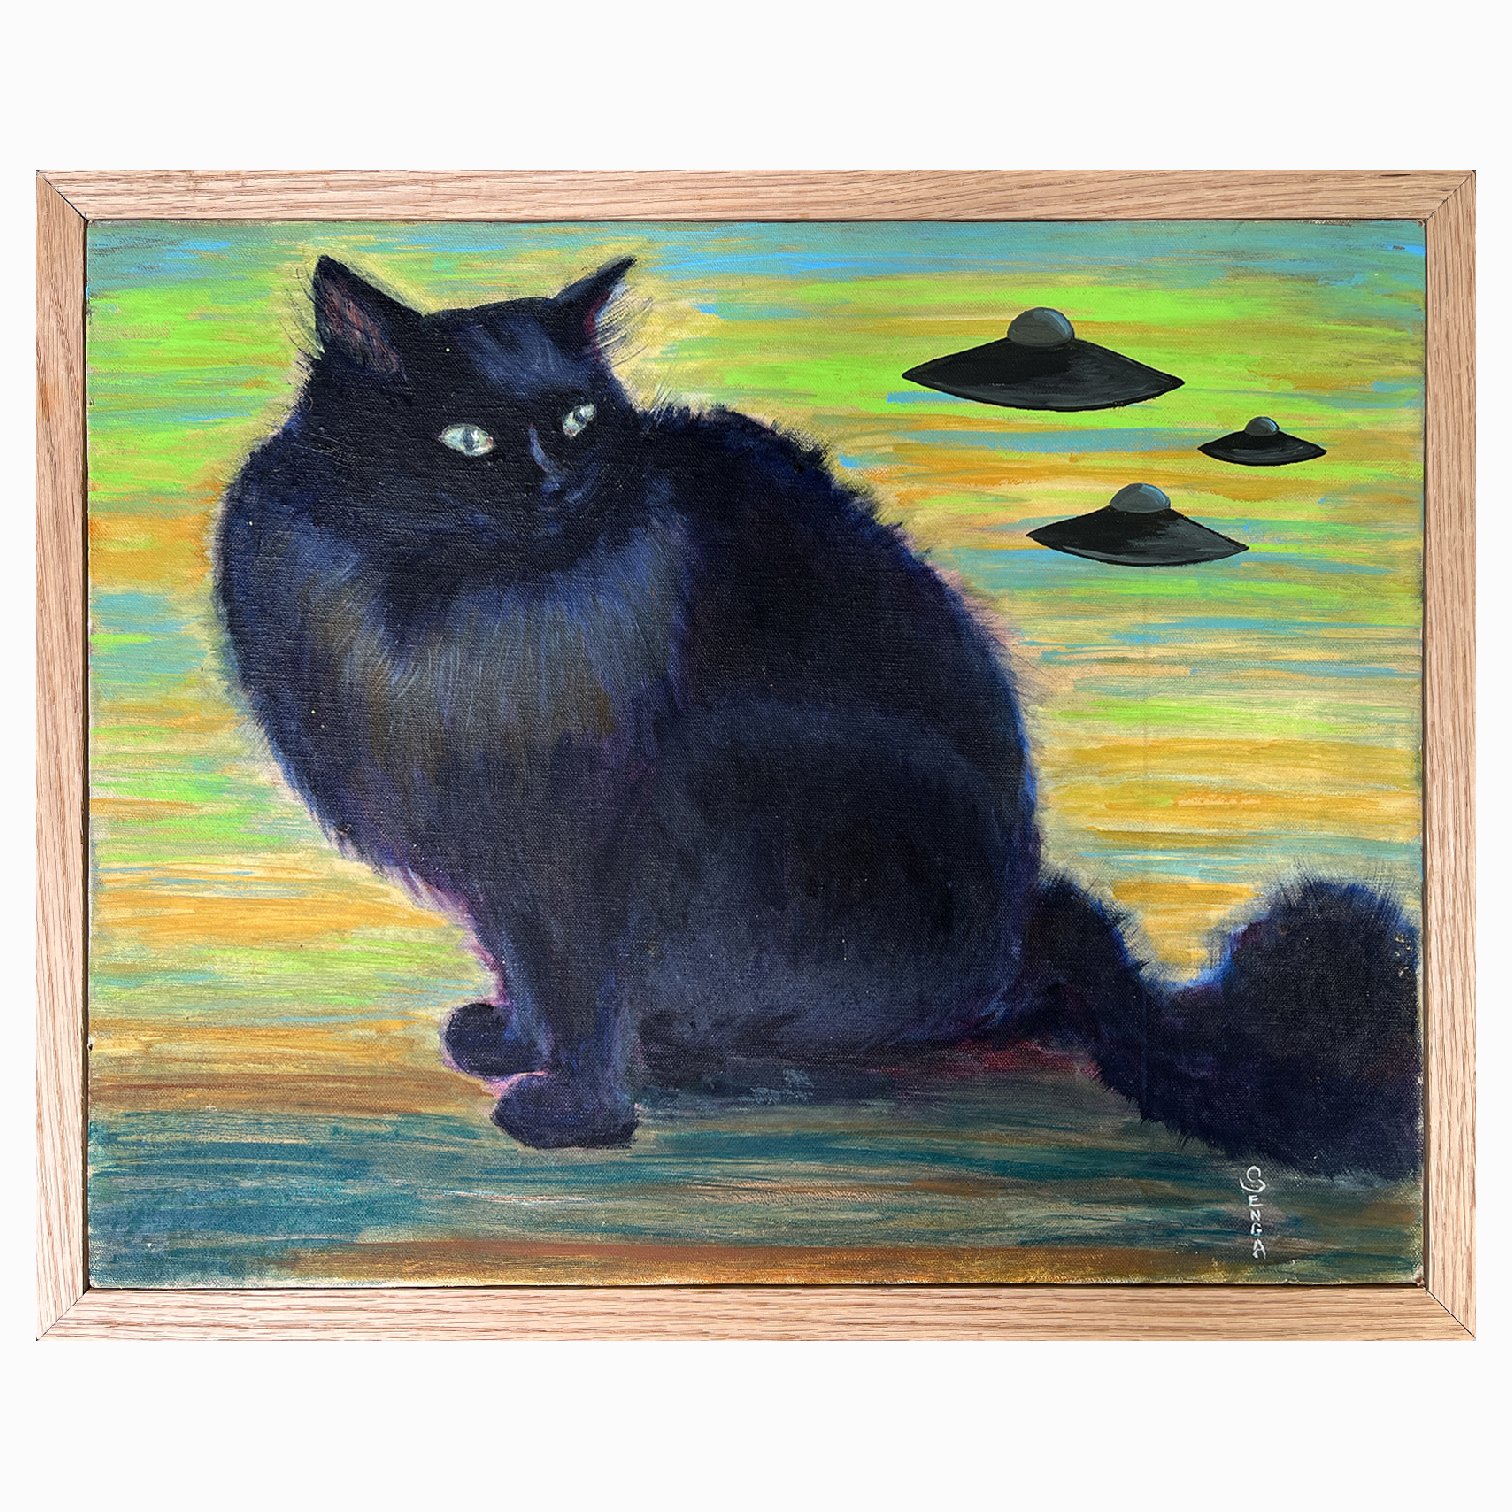 Black Cat with Looming UFOs